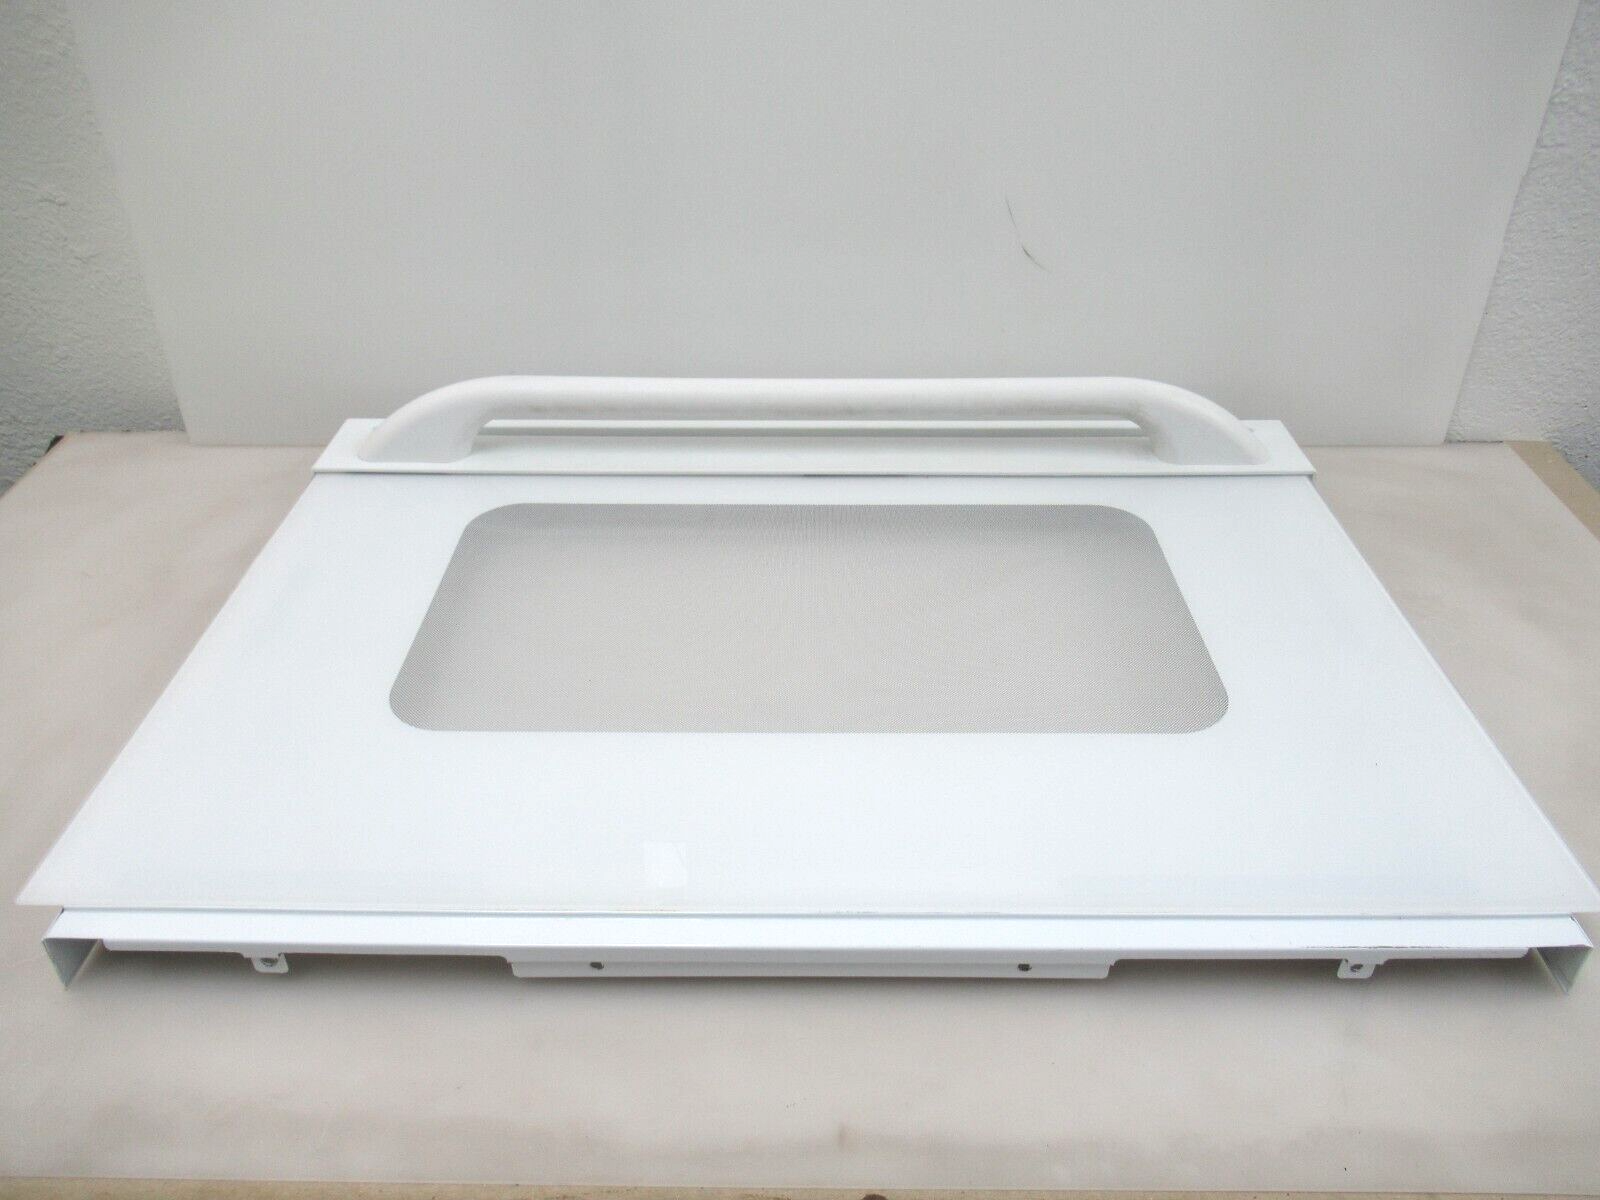 GE Double Oven Door Outer Glass w/Vent Trim & Handle  WB57T10211  WB15T10109 - $110.40